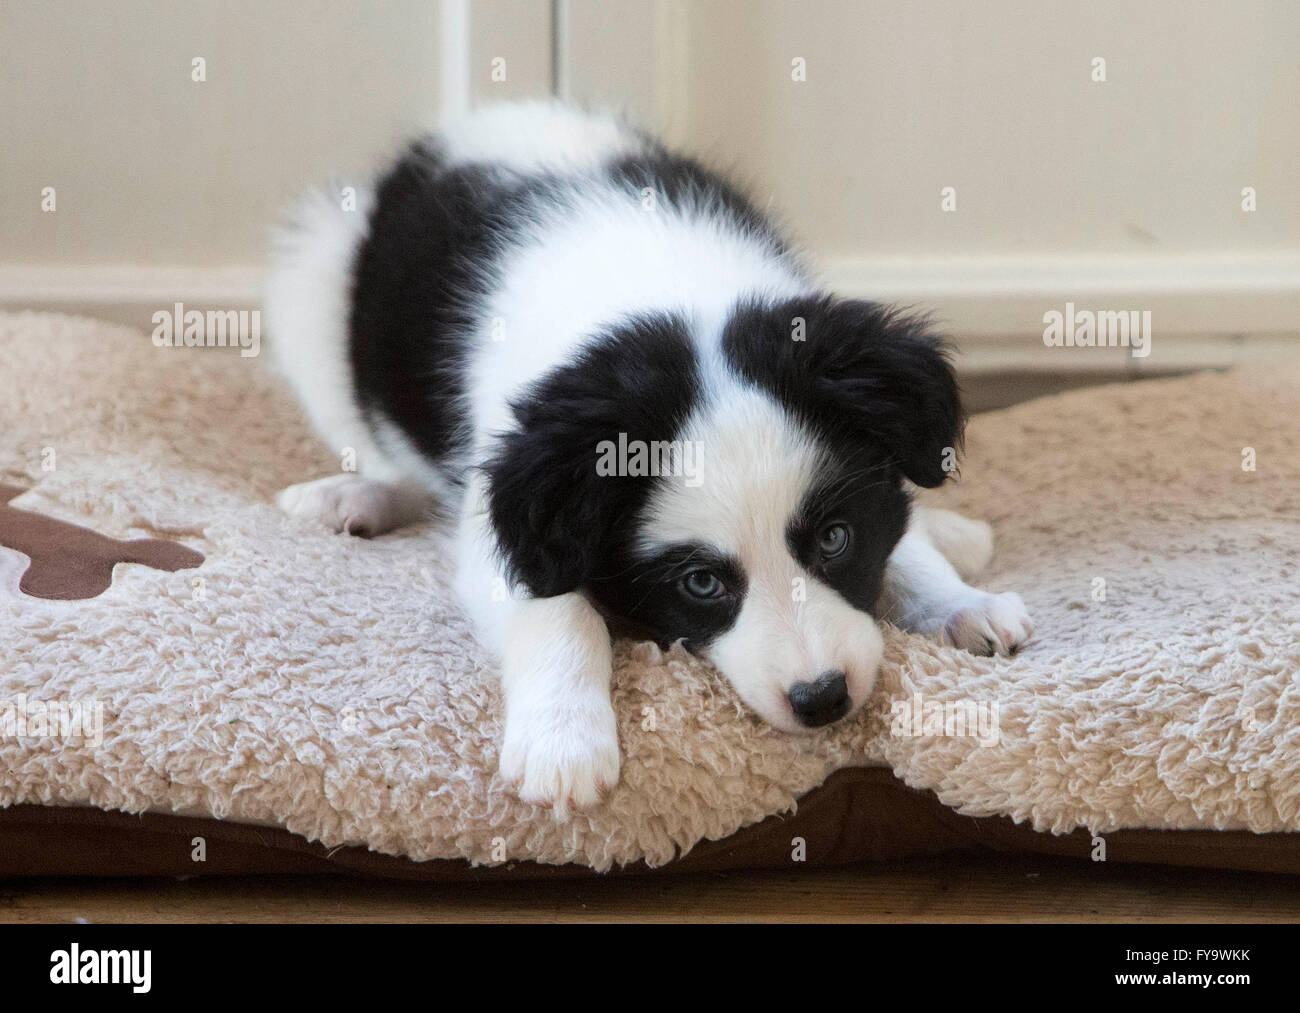 Border Collie Puppy looking cute Stock Photo